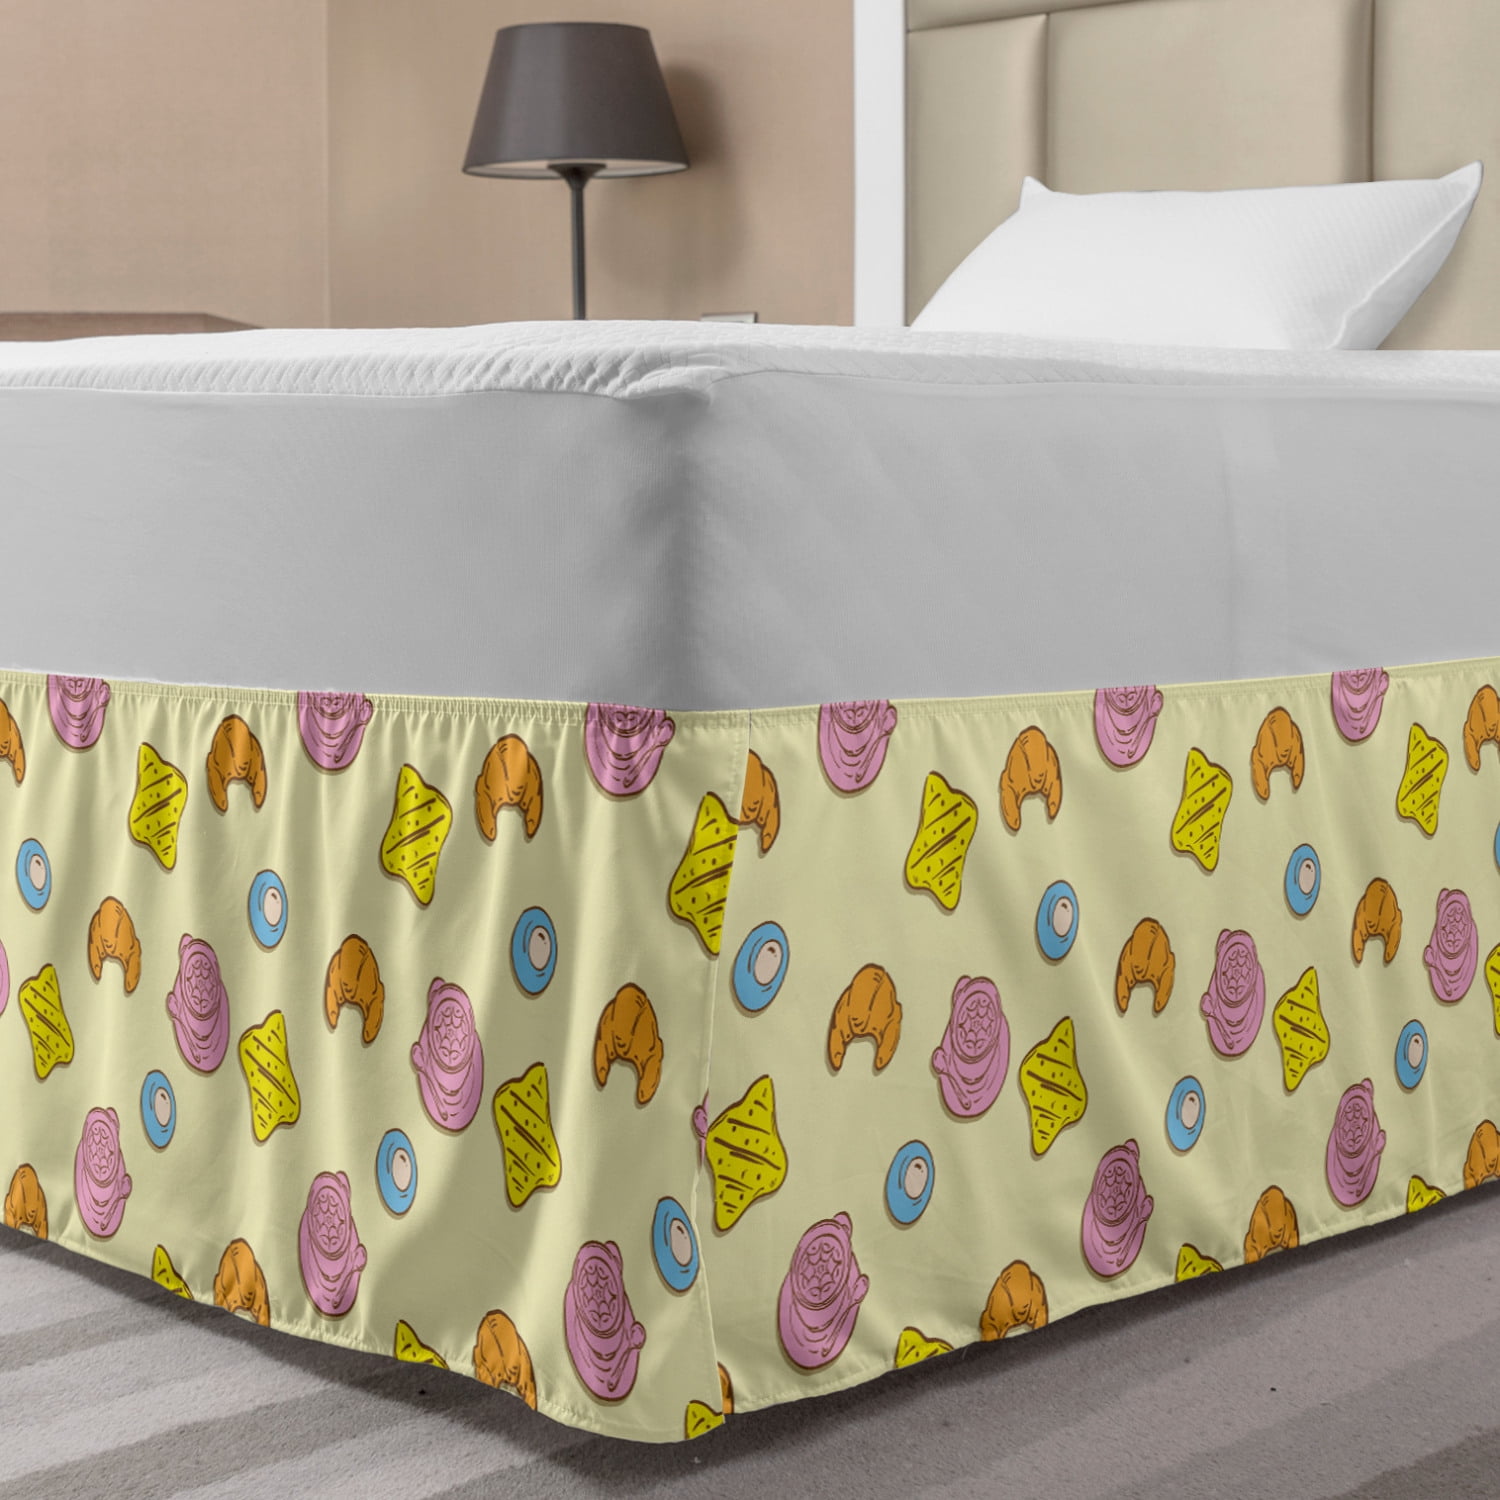 Details about   Wrap Around Bed Skirt  Fabric Three Sides All Color Queen Size 100% Microfiber 